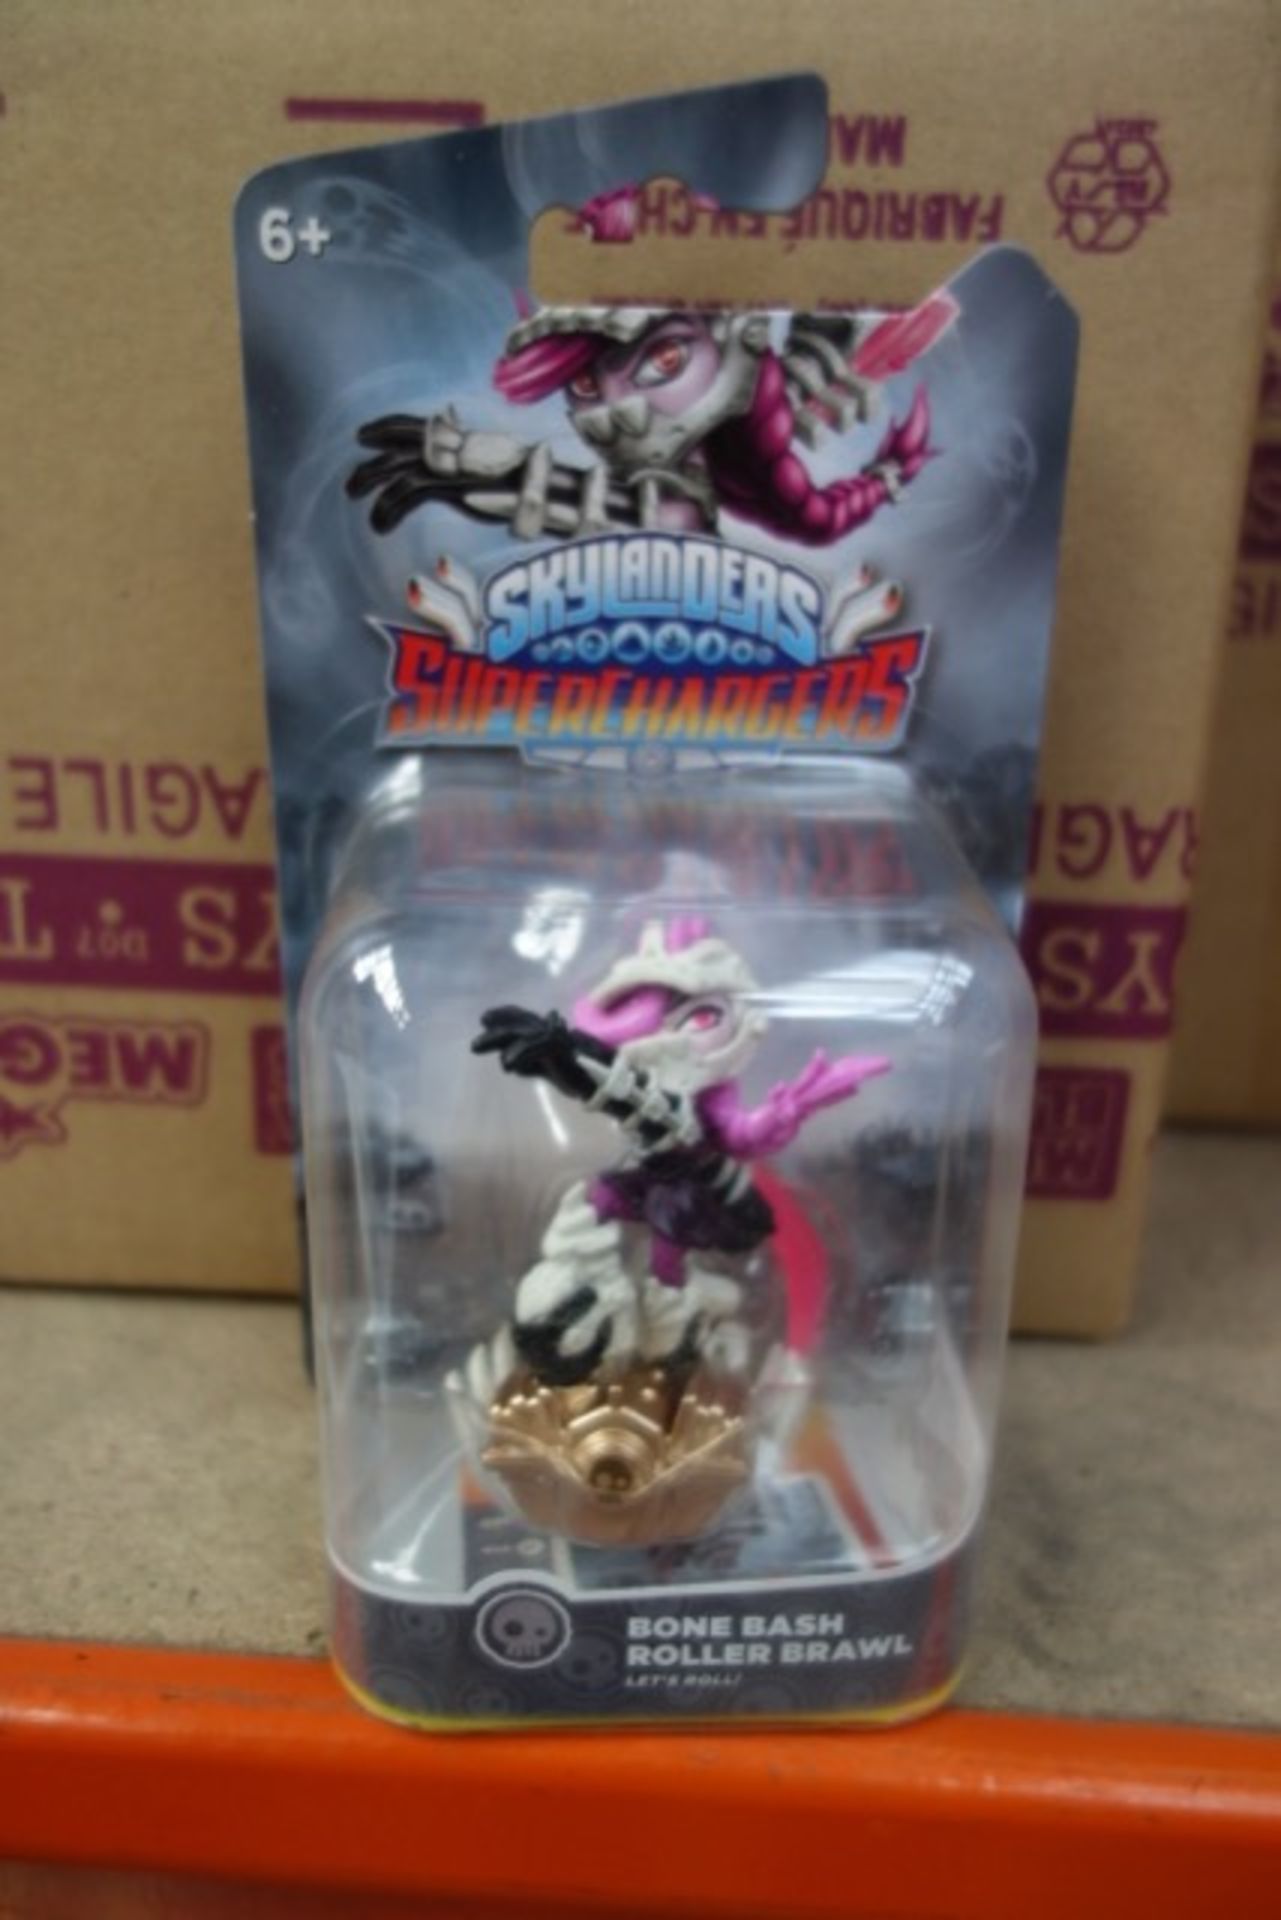 24 x Skylanders Superchargers Bone Bash Roller Brawl Figures. RRP £14.99 each, giving this lot a